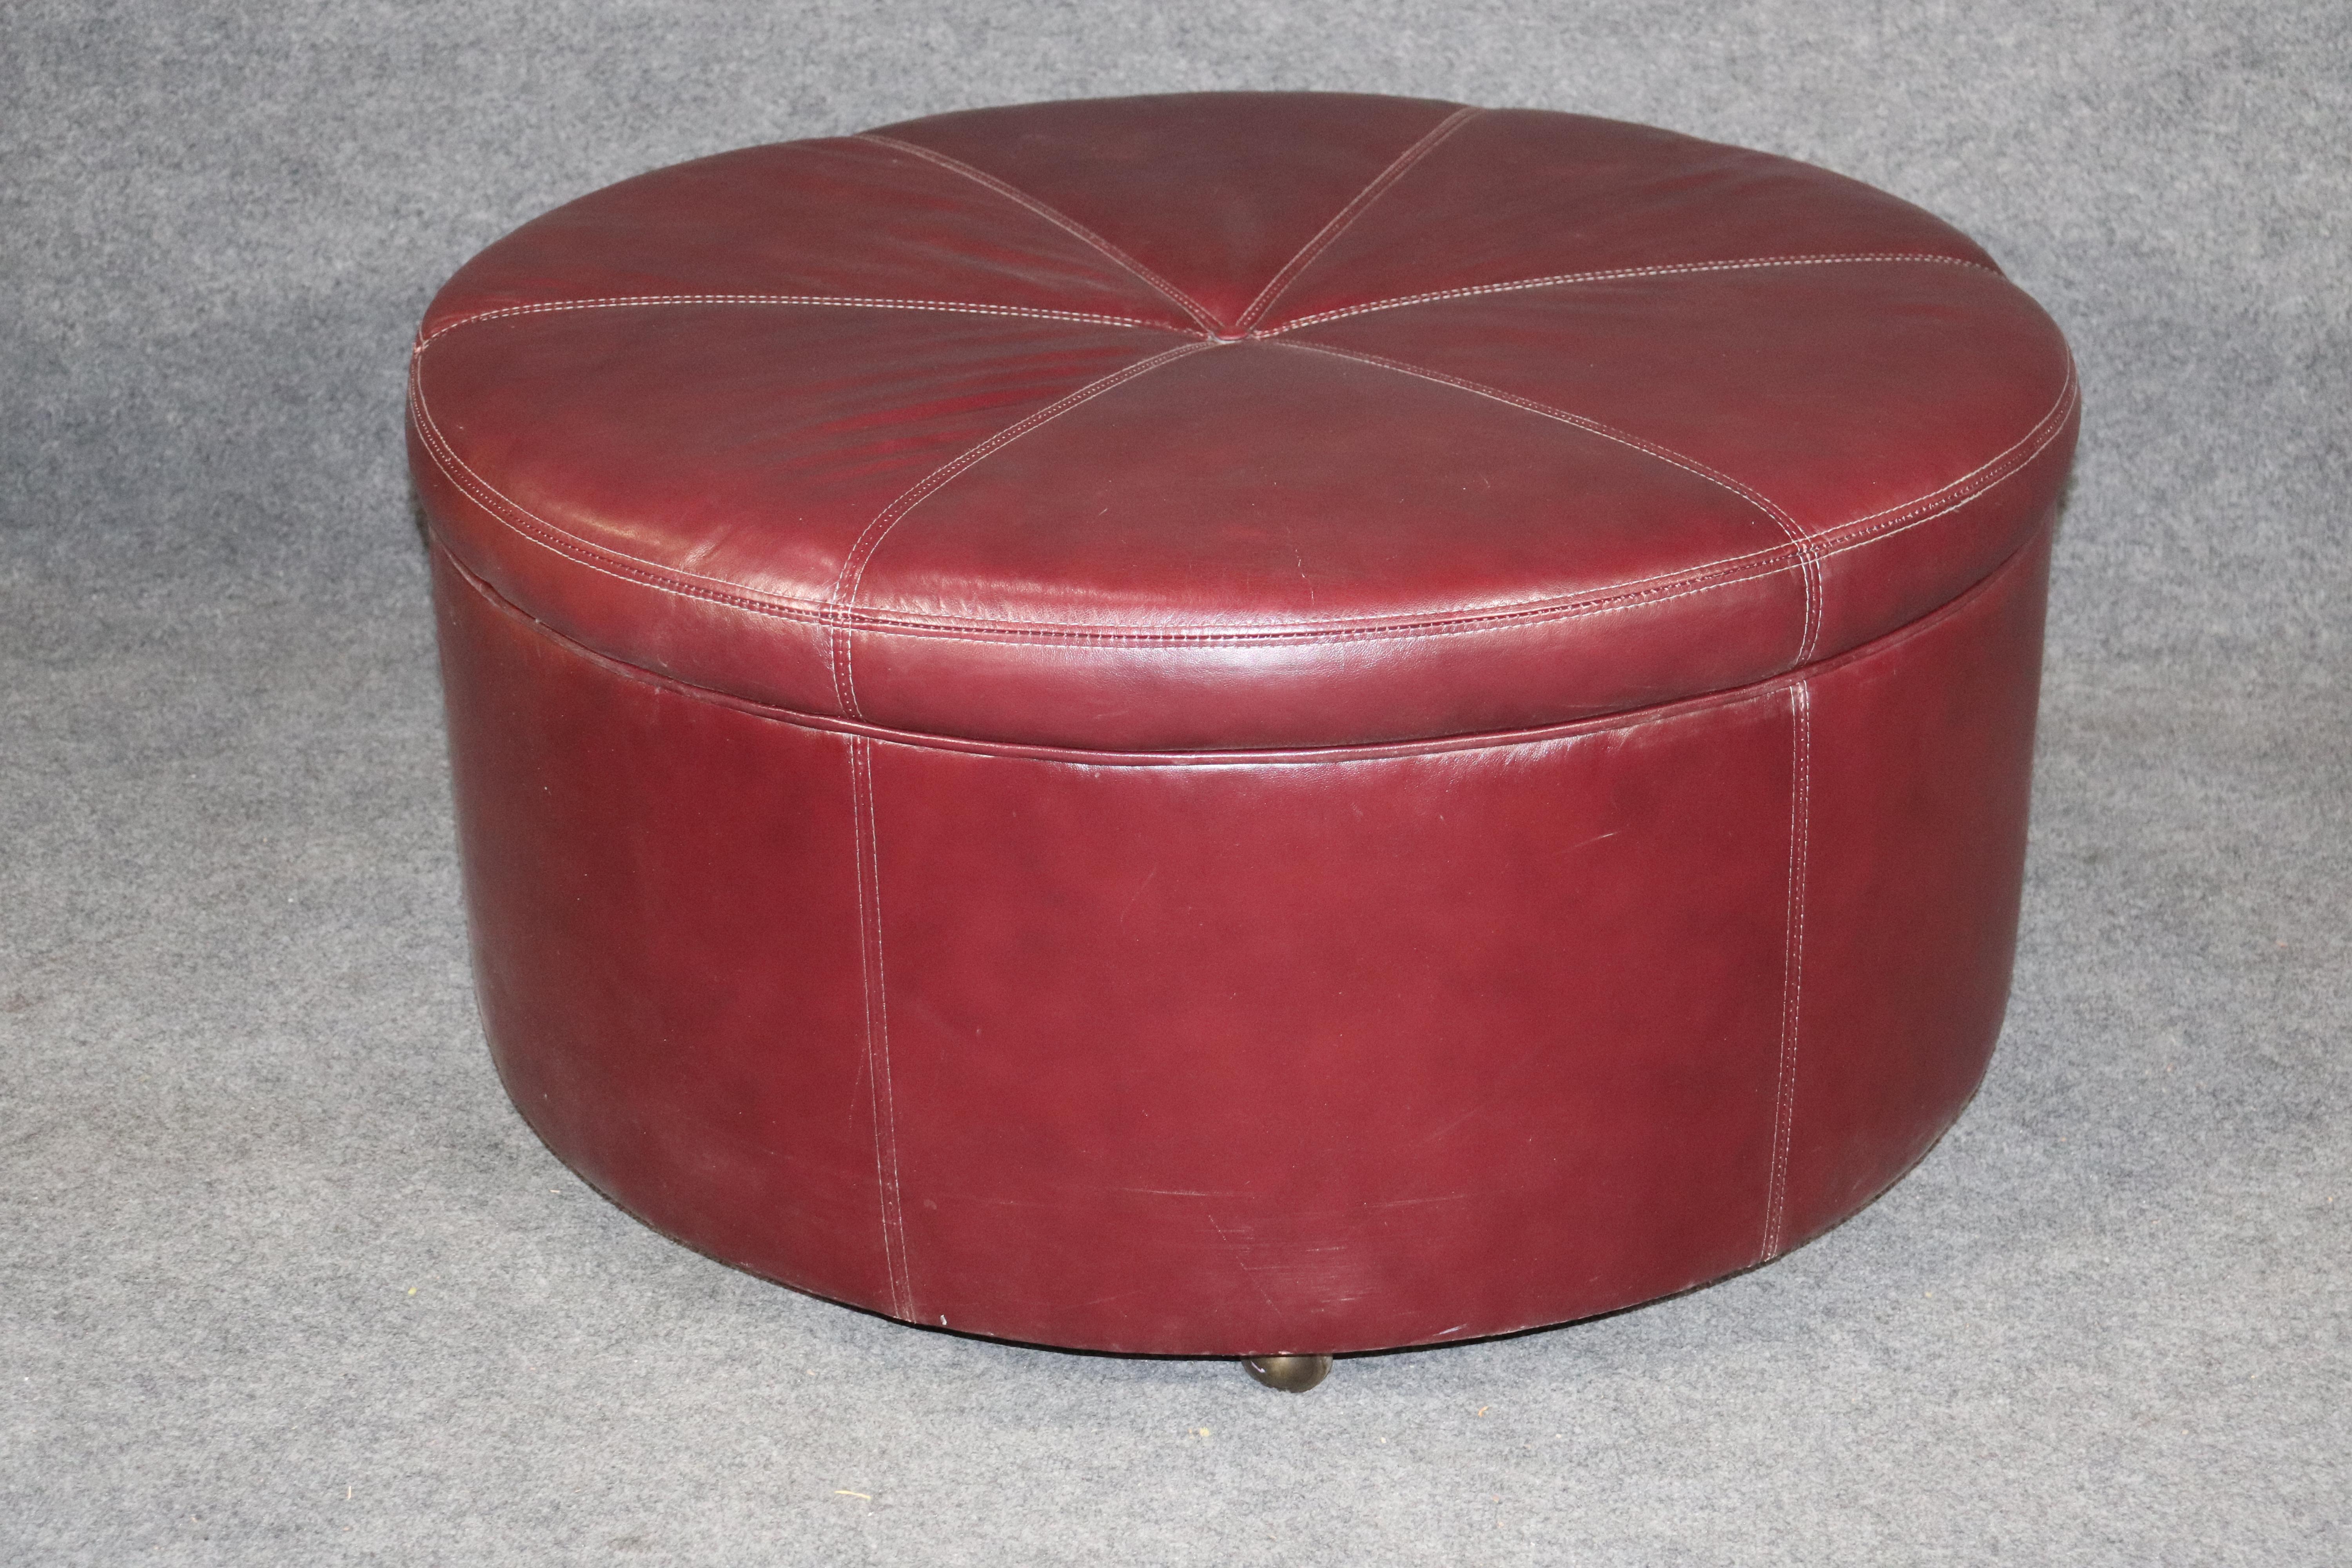 Vintage foot stool in leather with rolling casters. Attractive stitching with middle button.
Please confirm location NY or NJ.